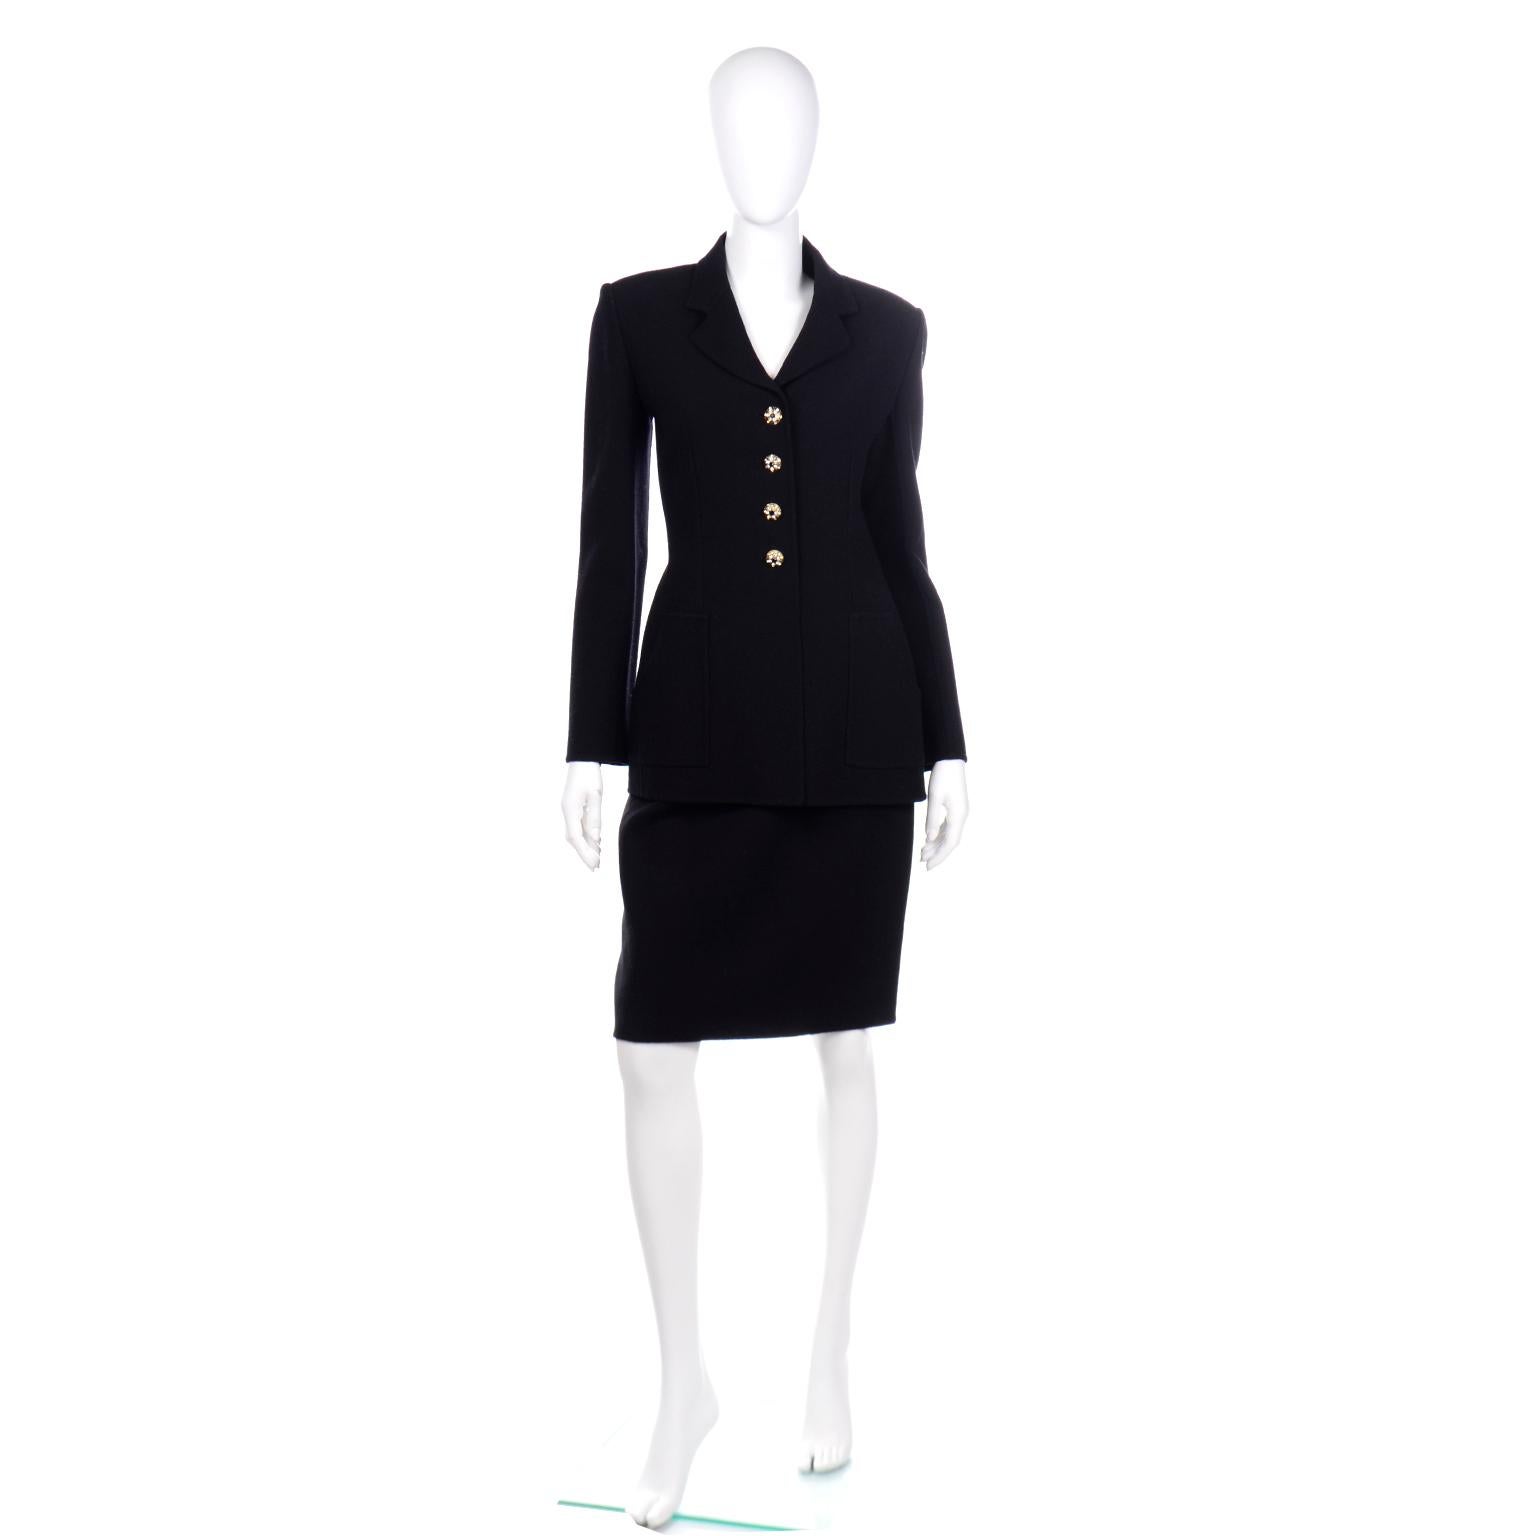 This lovely Bill Blass vintage 2 piece black wool blend crepe suit includes an unlined jacket with rhinestone and black buttons down the center front and a straight skirt. This lightweight suit was purchased at Saks Fifth Avenue in the 1990's and